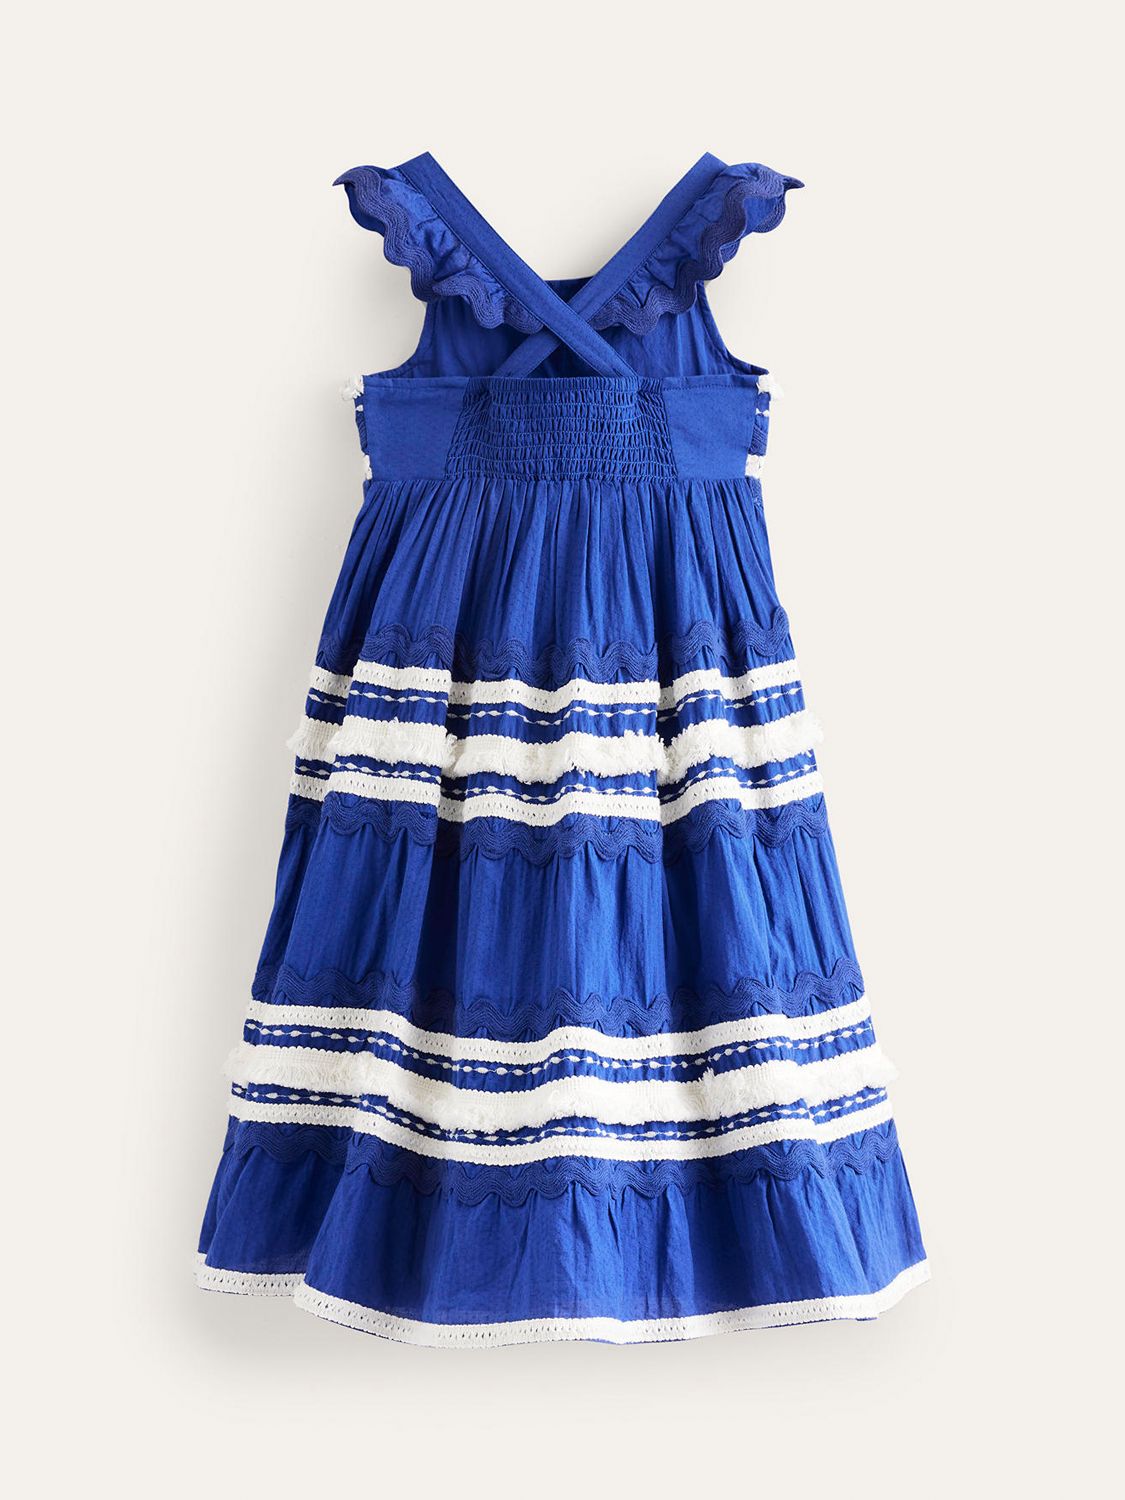 Buy Boden Kids' Tiered Twirly Ric Rac Dress, Sapphire Blue/White Online at johnlewis.com